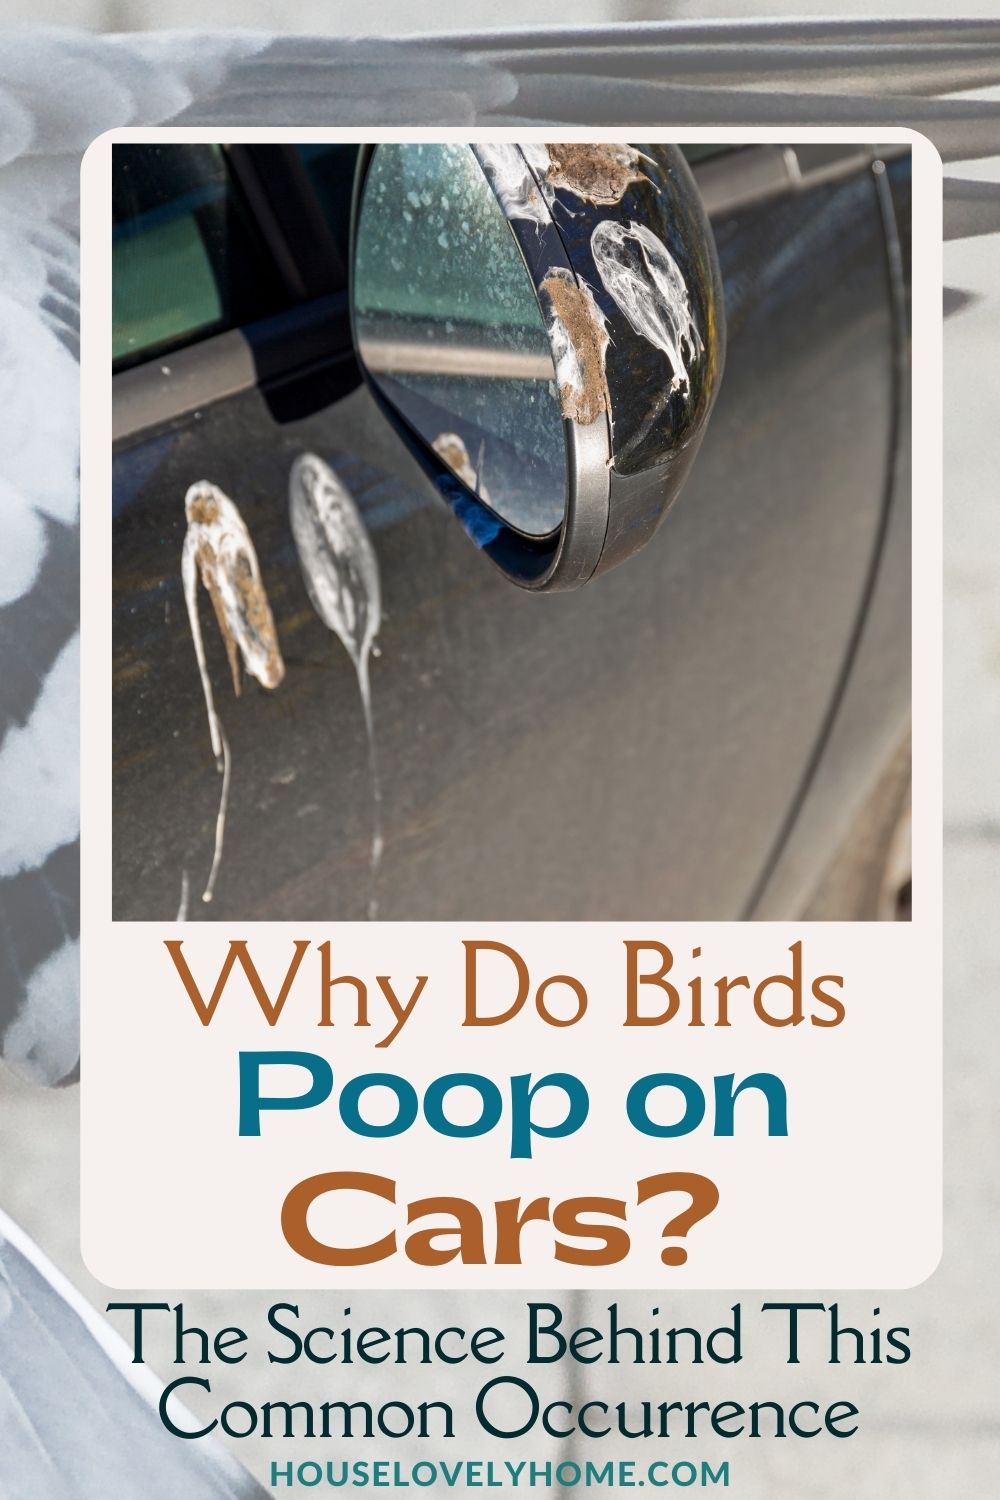 Why Do Birds Poop on Cars